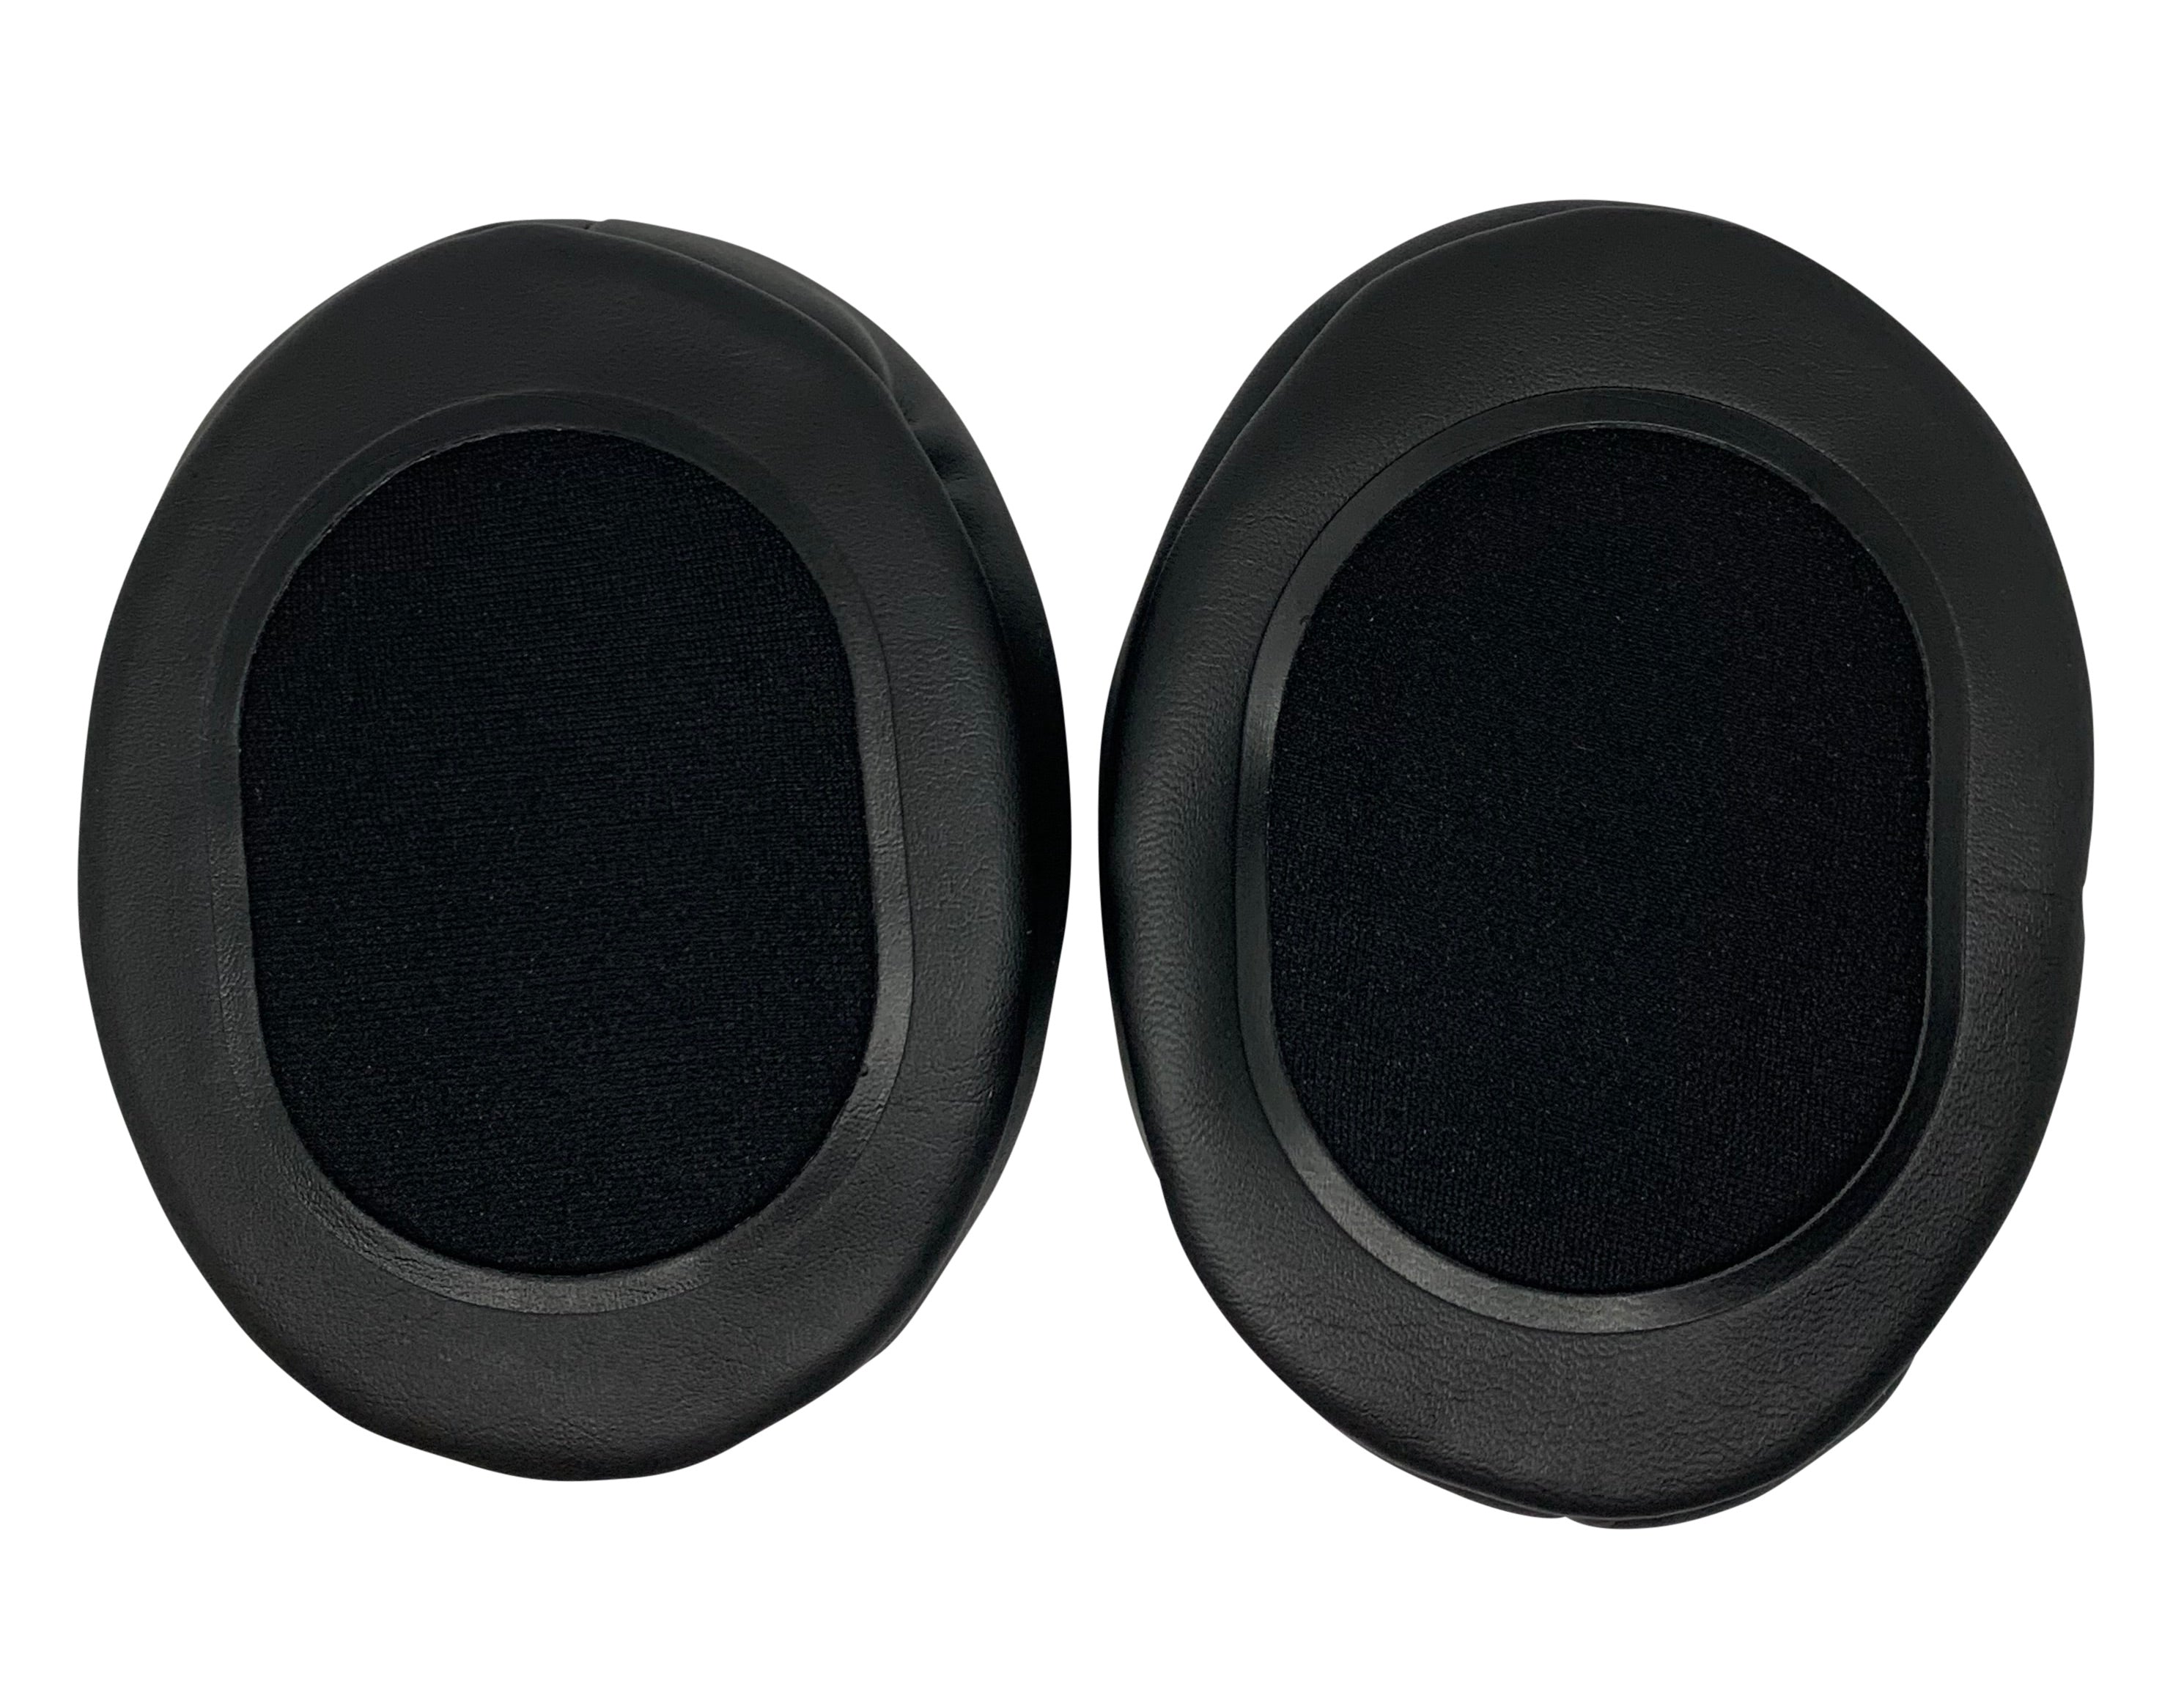 CentralSound Premium Replacement Ear Pad Cushions for SteelSeries Arctis Gaming Headsets - CentralSound